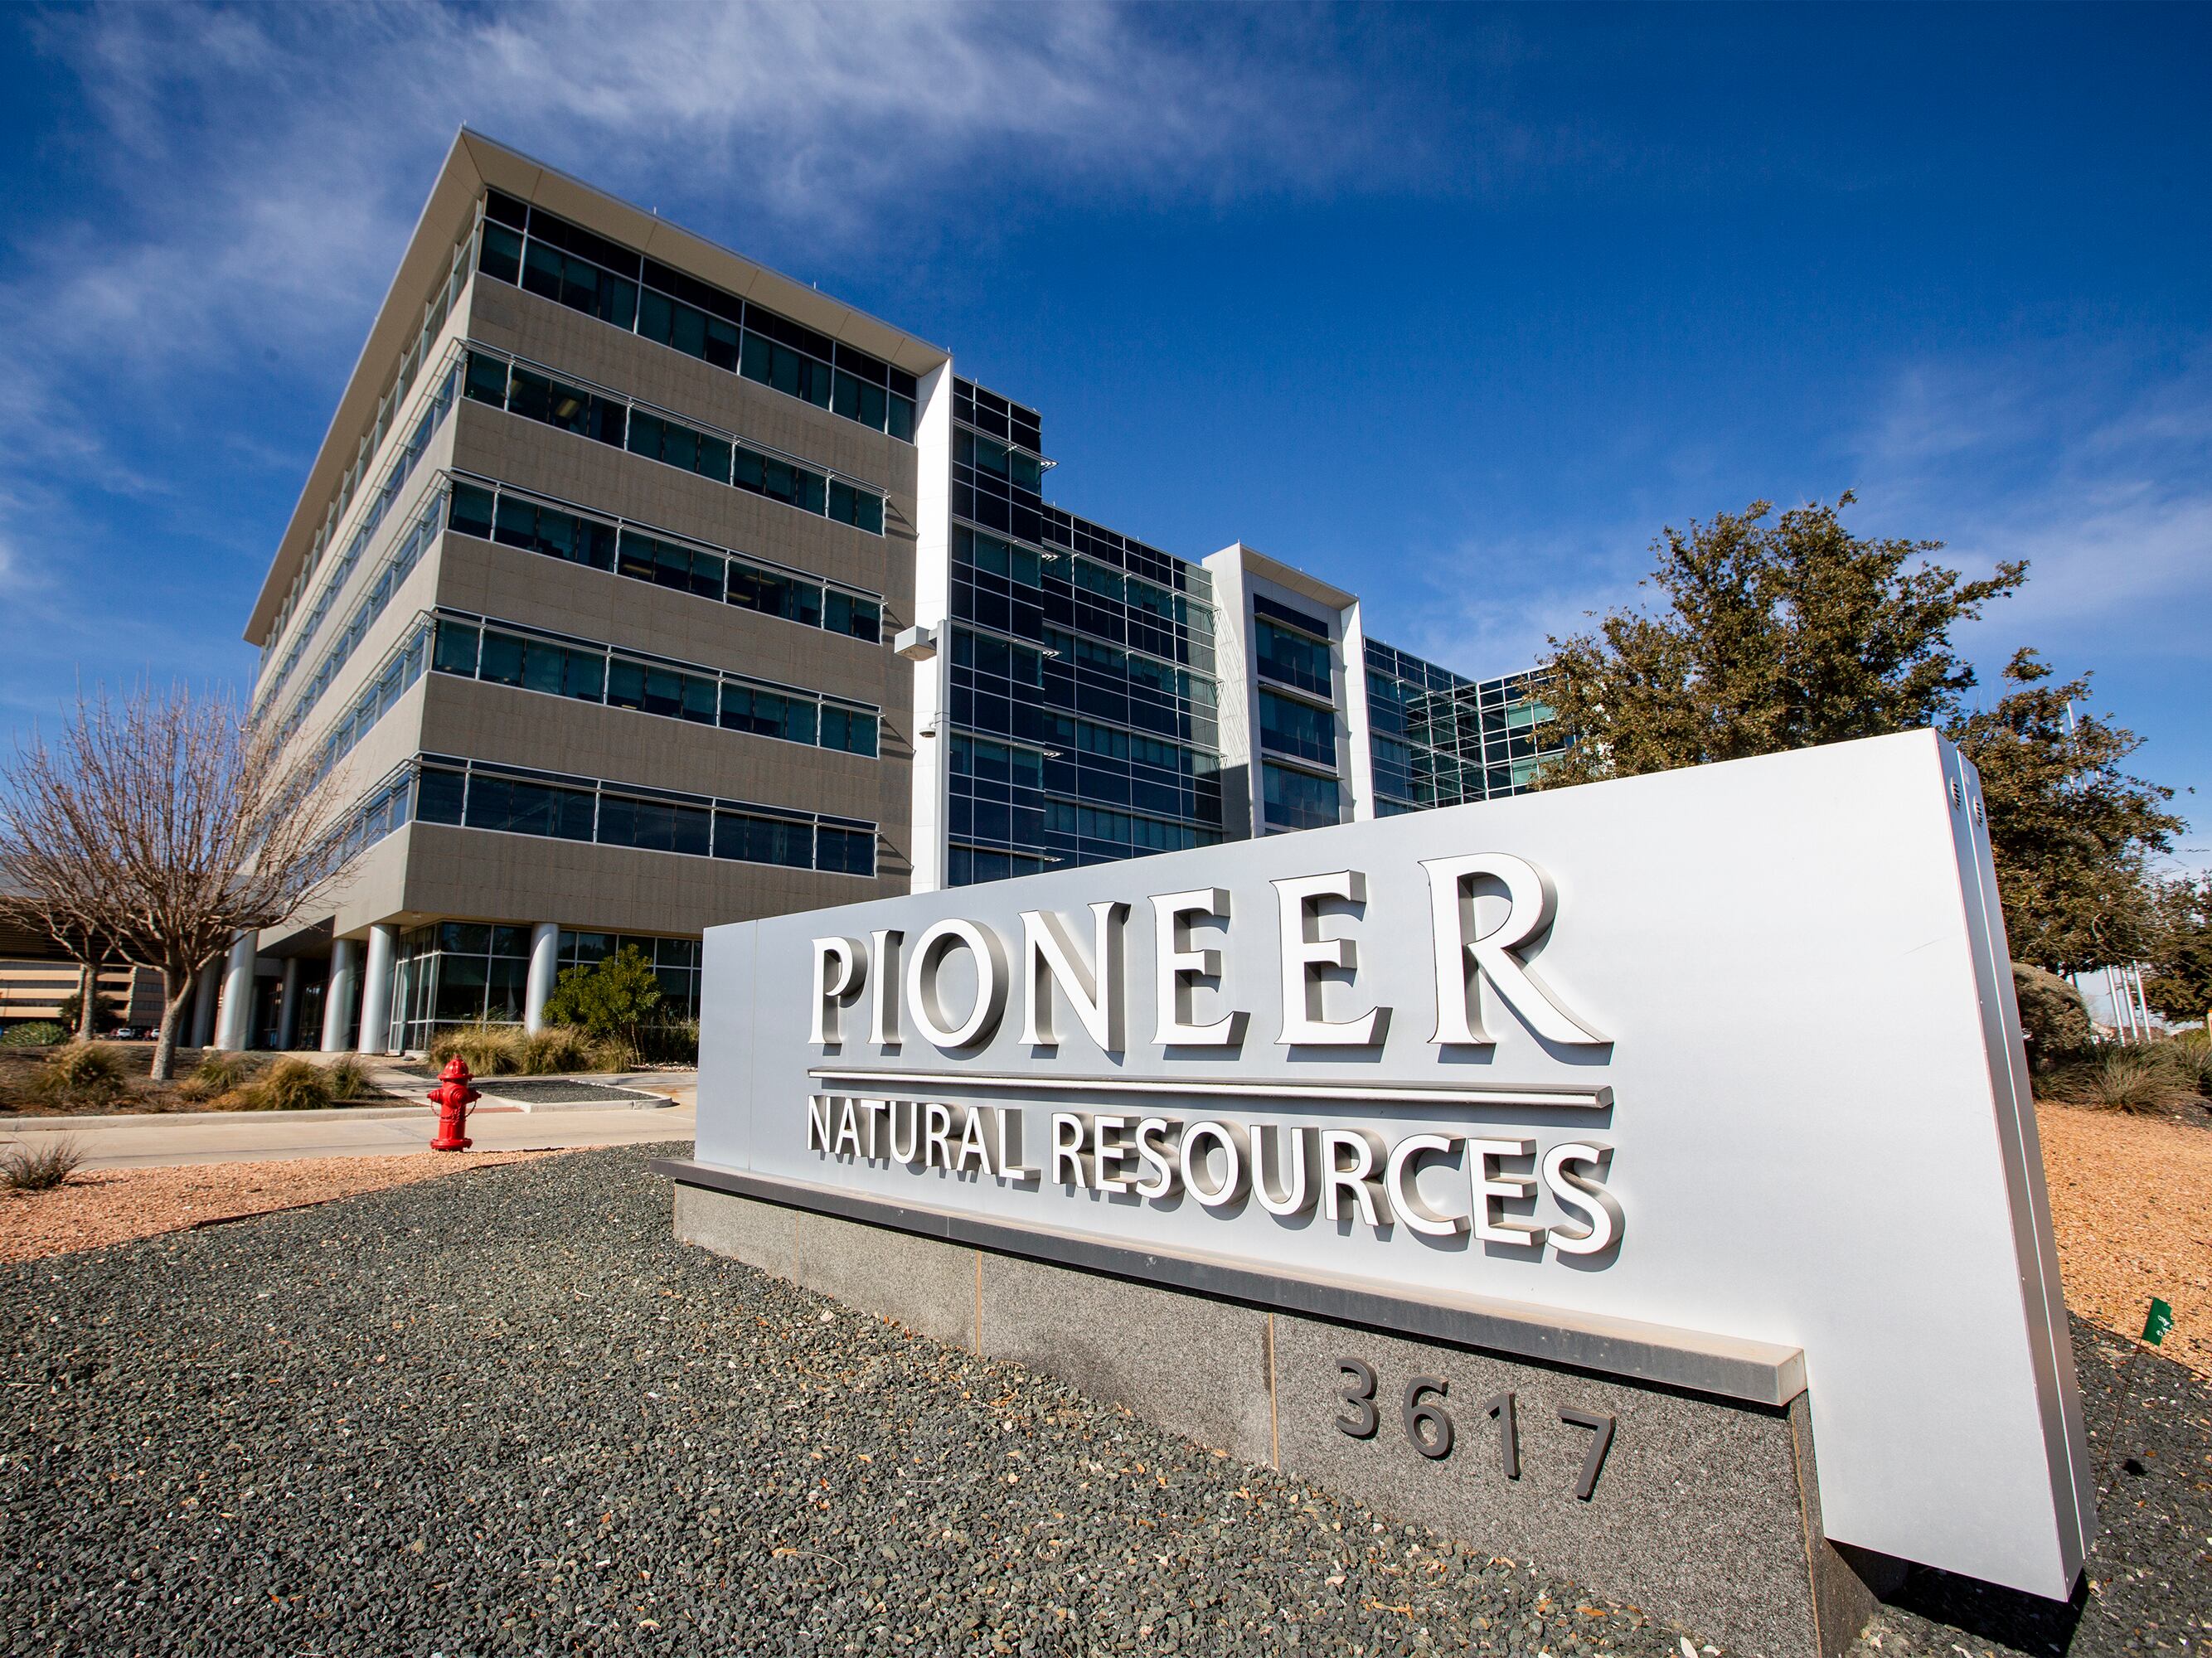 Pioneer Natural Resources' office is shown on Jan. 13, 2021, in Midland, Texas. Exxon Mobil's $60 billion deal to buy Pioneer has received clearance from the Federal Trade Commission, but the former CEO of Pioneer was barred from joining the new company's board of directors.